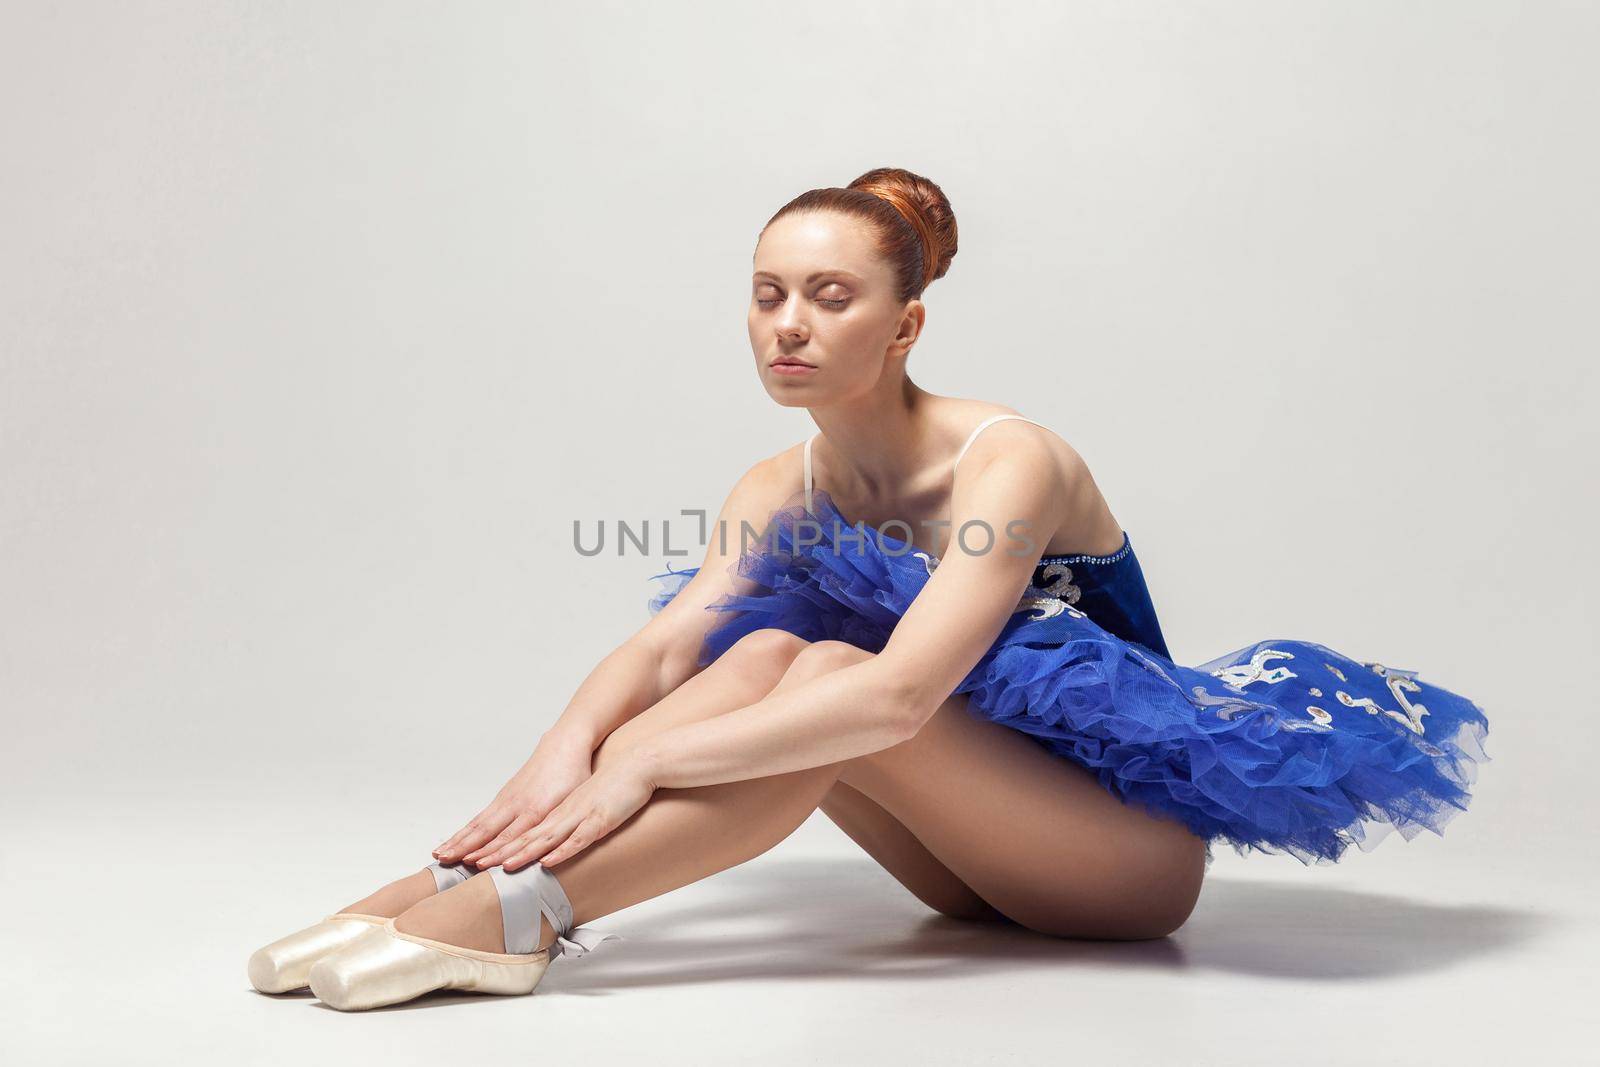 ballerina with closed eyes in blue dress and pointe shoes sitting on white floor. indoor, studio shot.